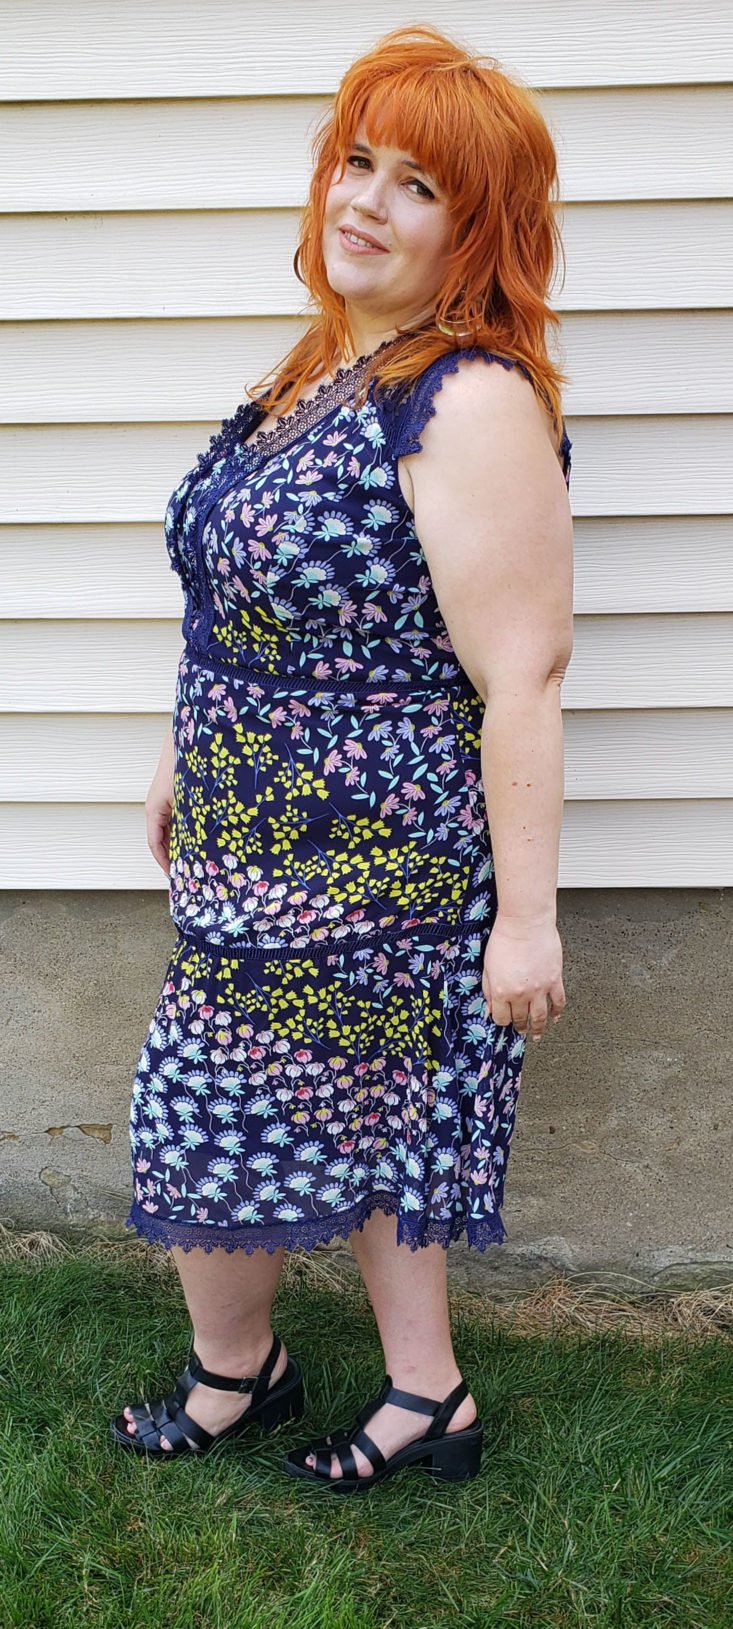 Dia & Co Subscription Box July 2019 - Model Wearing Keller Lace Patterned Dress Side View Front